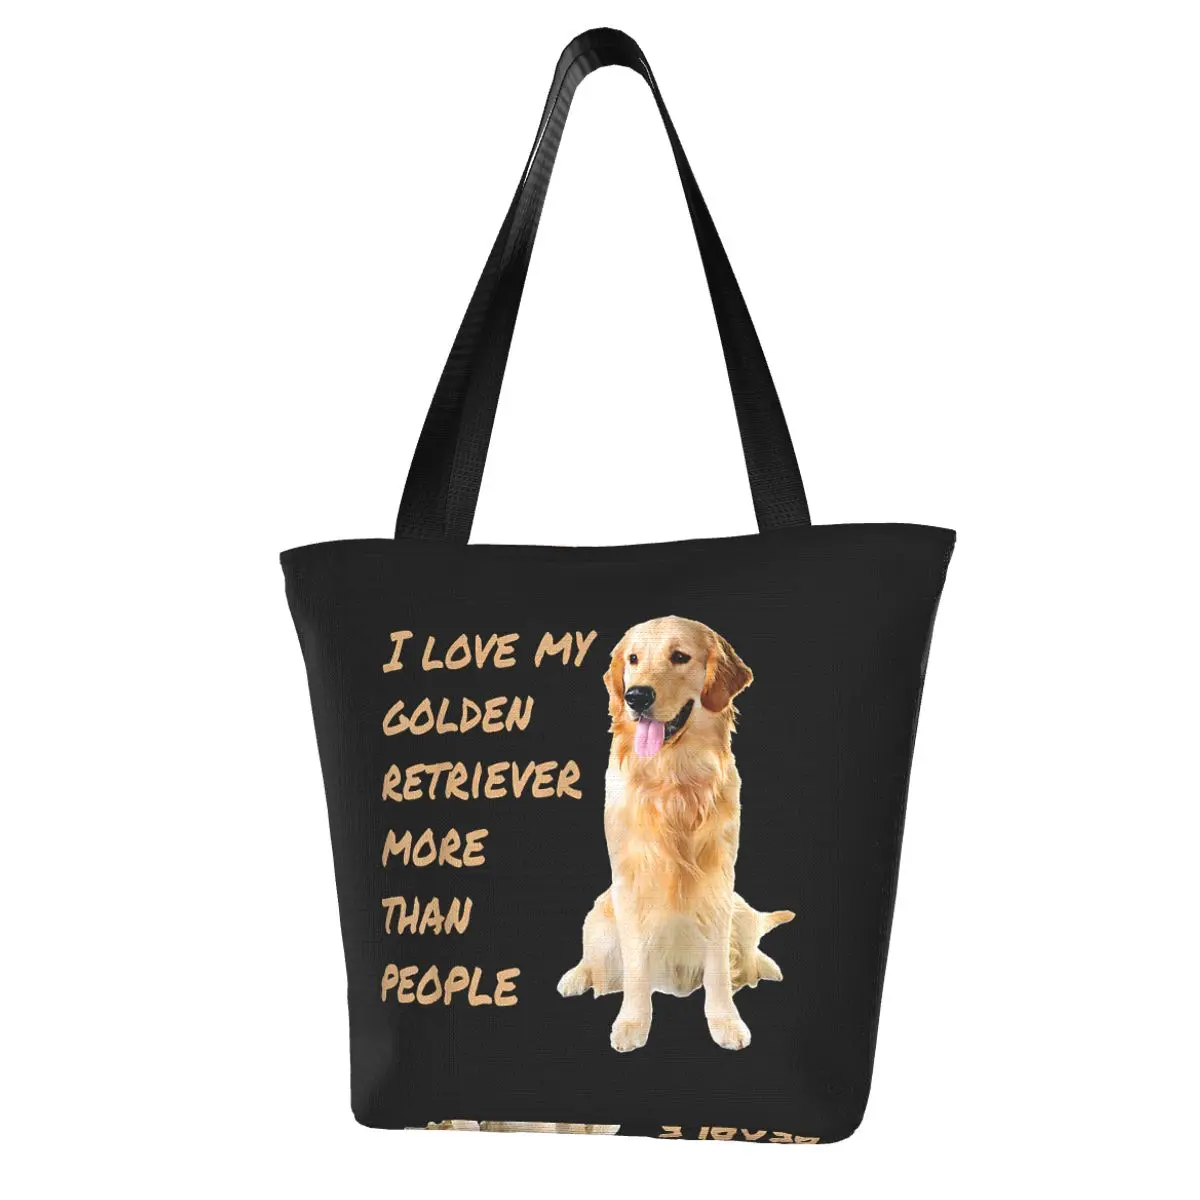 I Love My Golden Retriever More Than People Dogs Introvert Shopping Bag Aesthetic Cloth Outdoor Handbag Female Fashion Bags